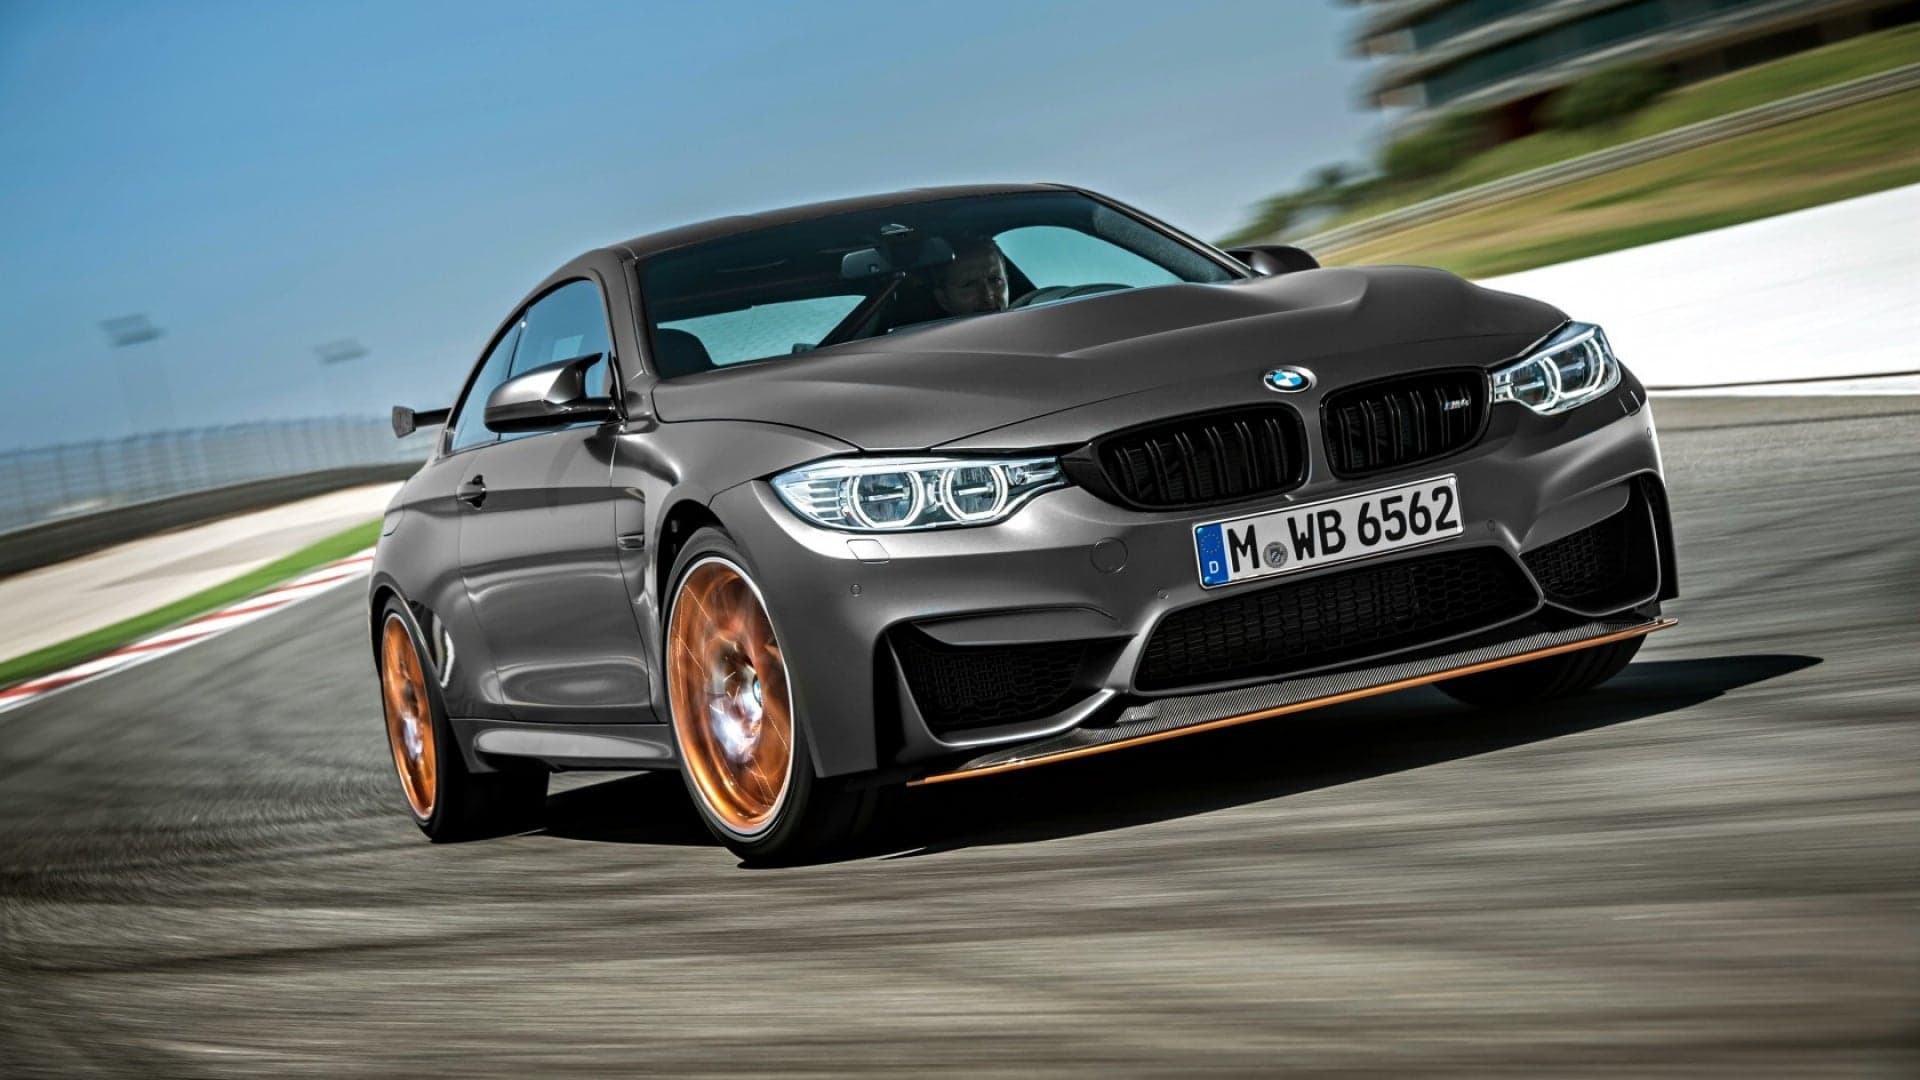 BMW Club Discussed Banning Bimmers With Active Safety Features From Track Days (Updated)